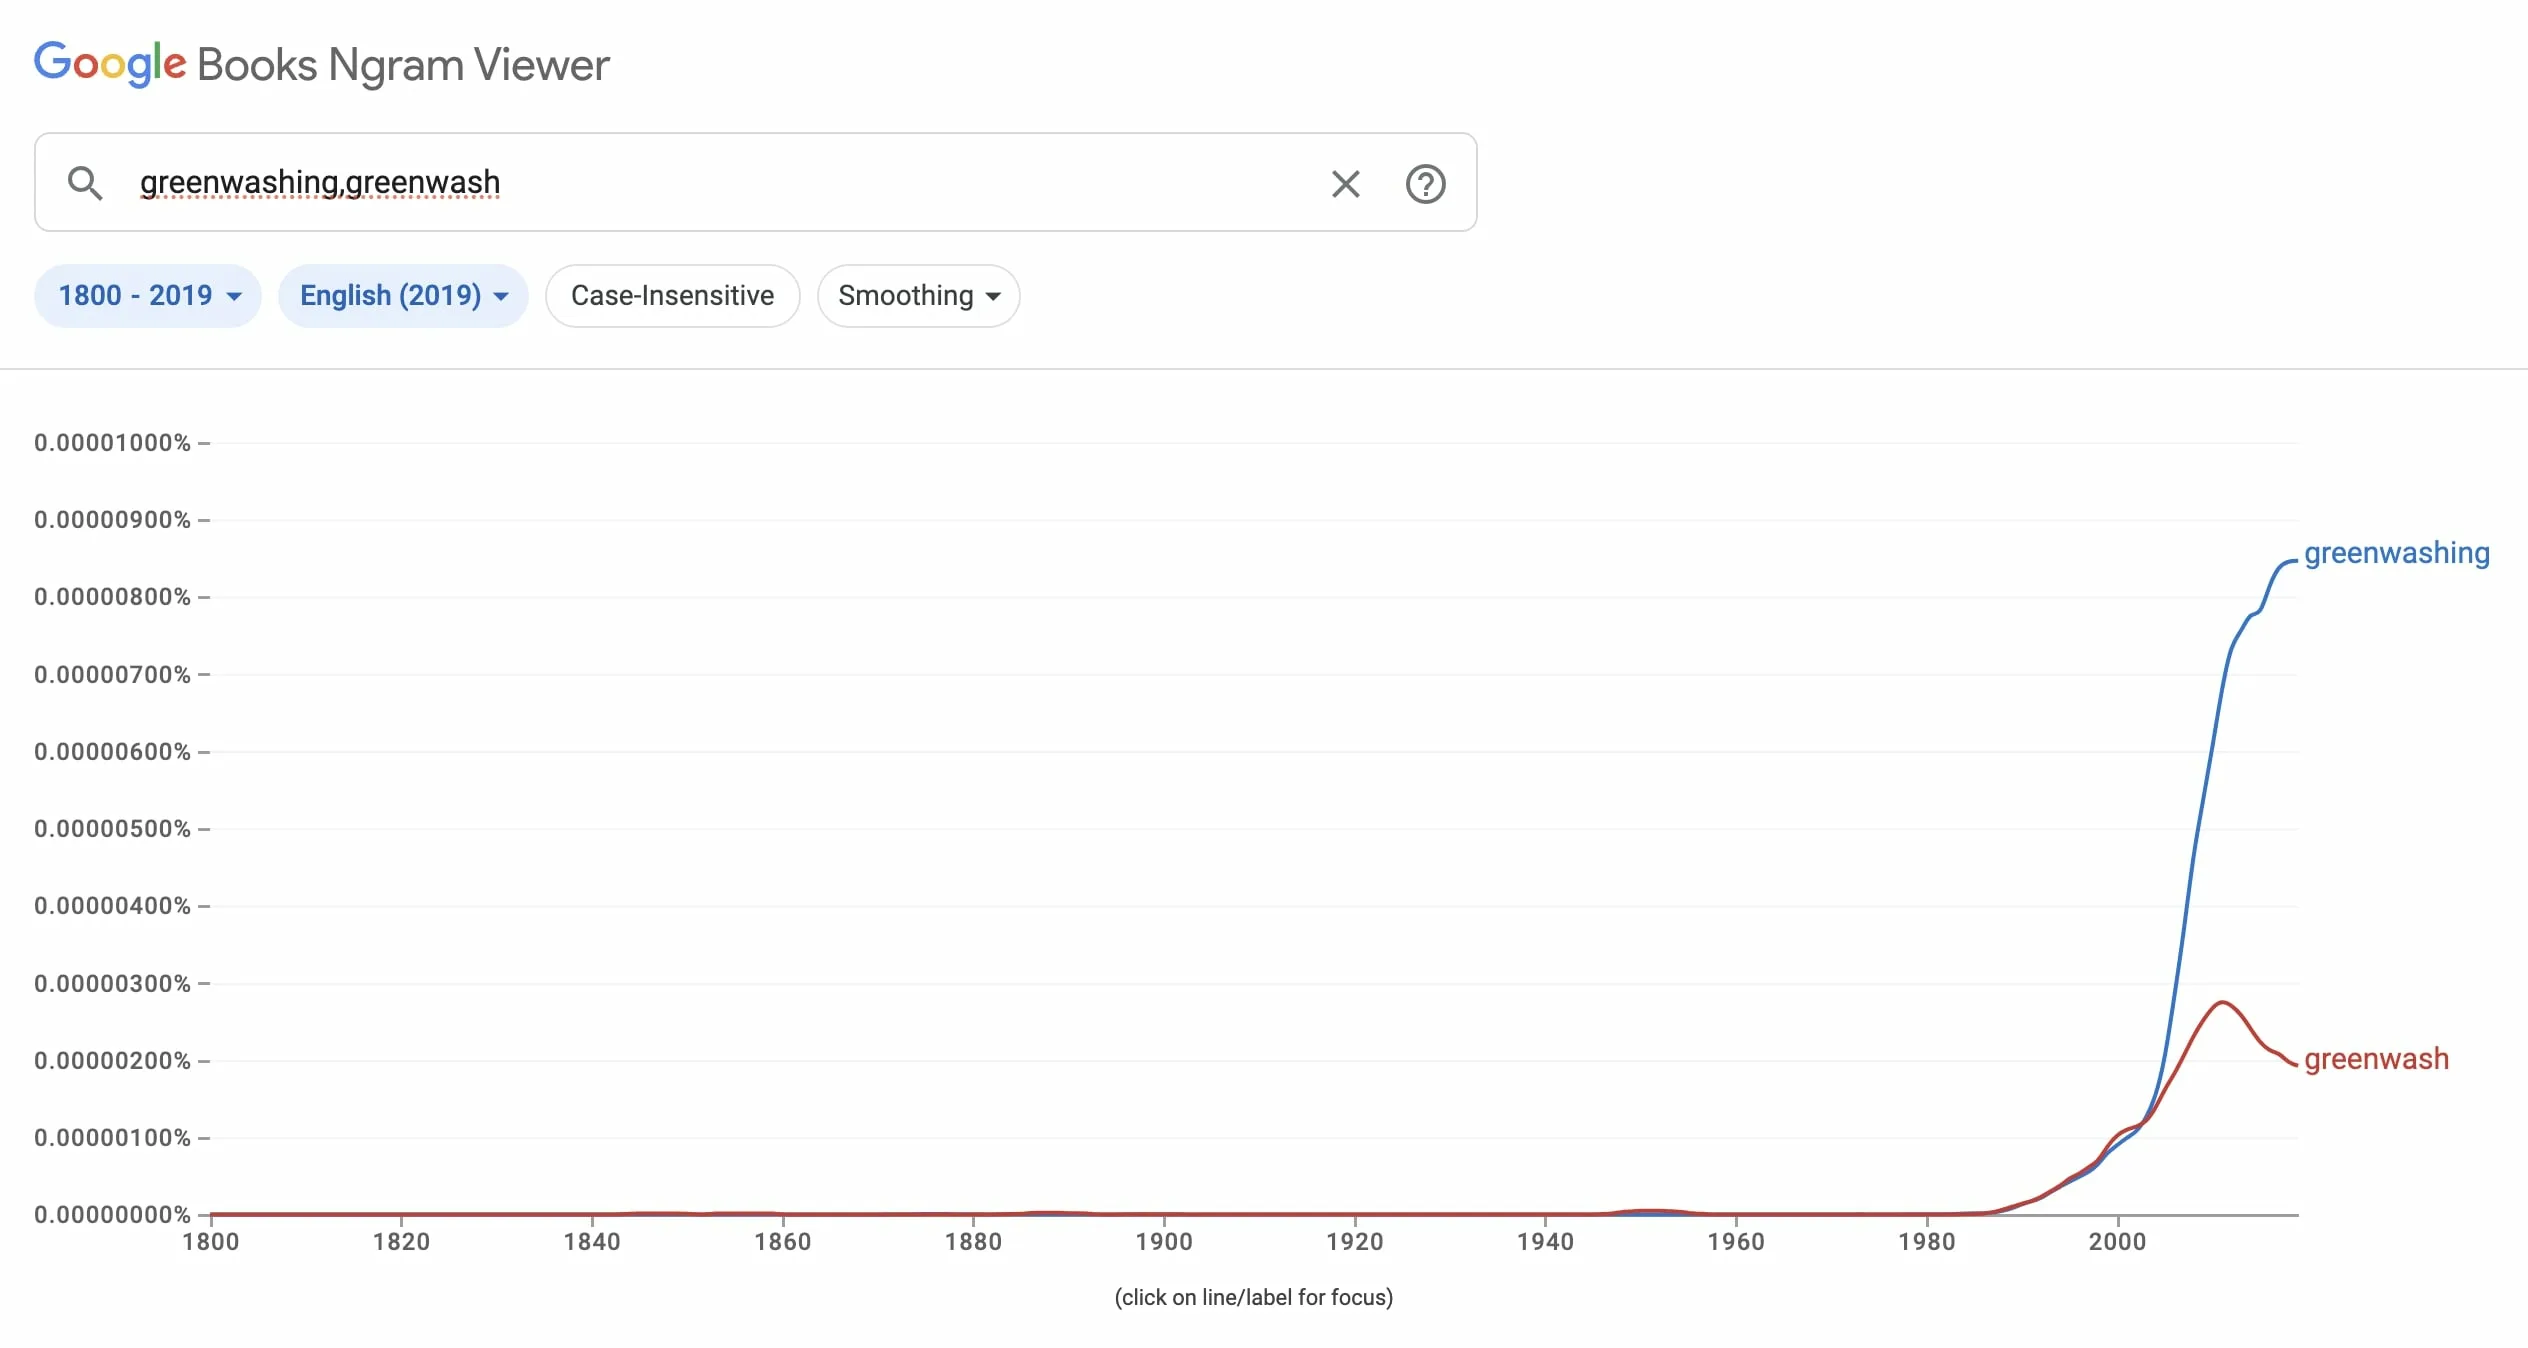 The history of greenwashing - mentions over time